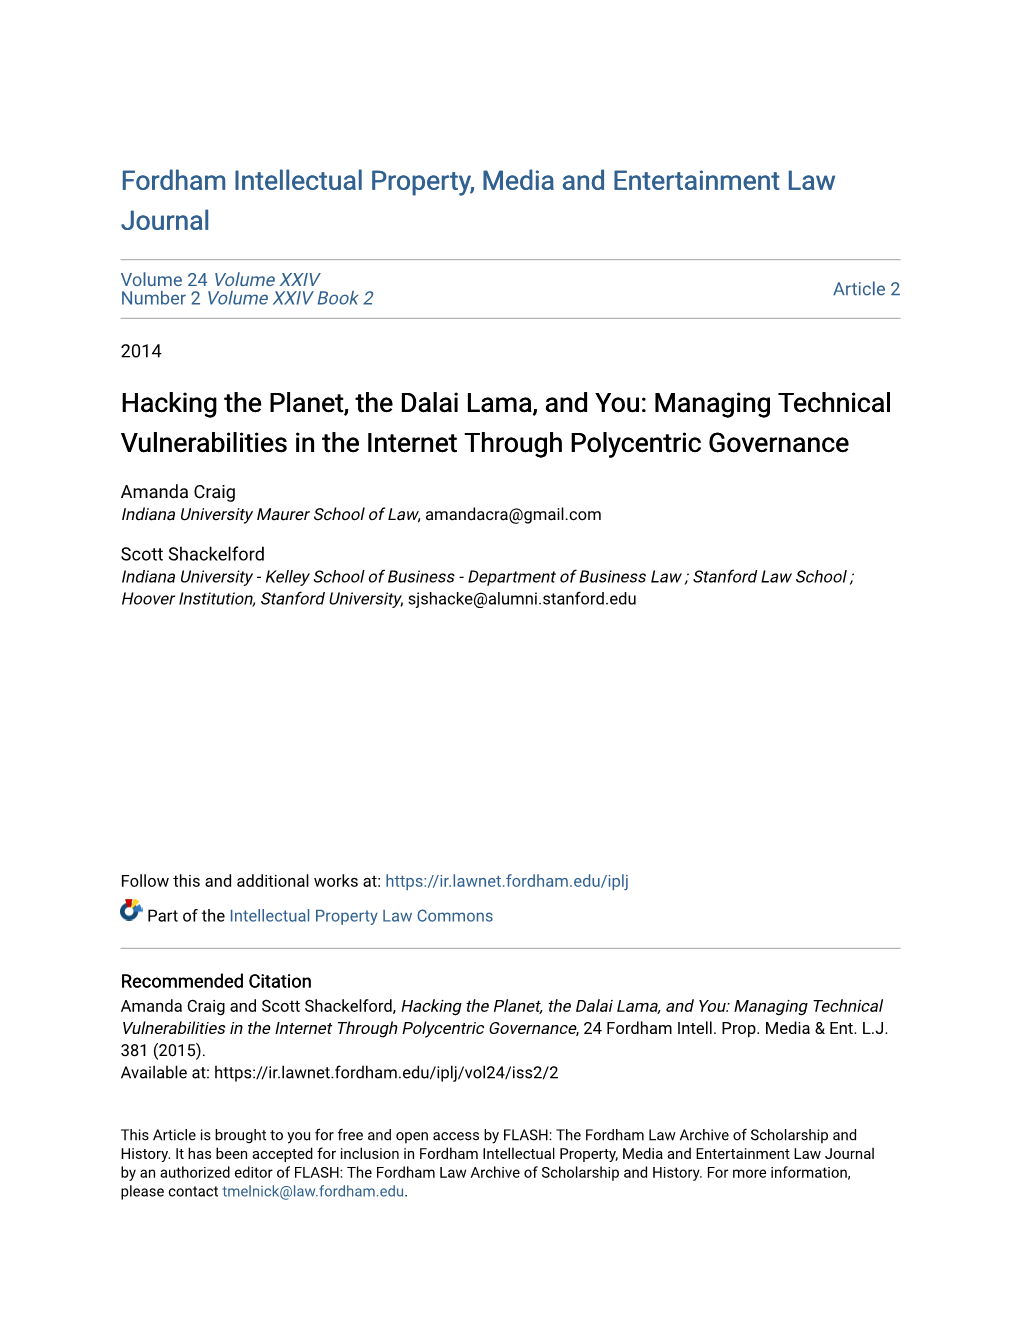 Hacking the Planet, the Dalai Lama, and You: Managing Technical Vulnerabilities in the Internet Through Polycentric Governance